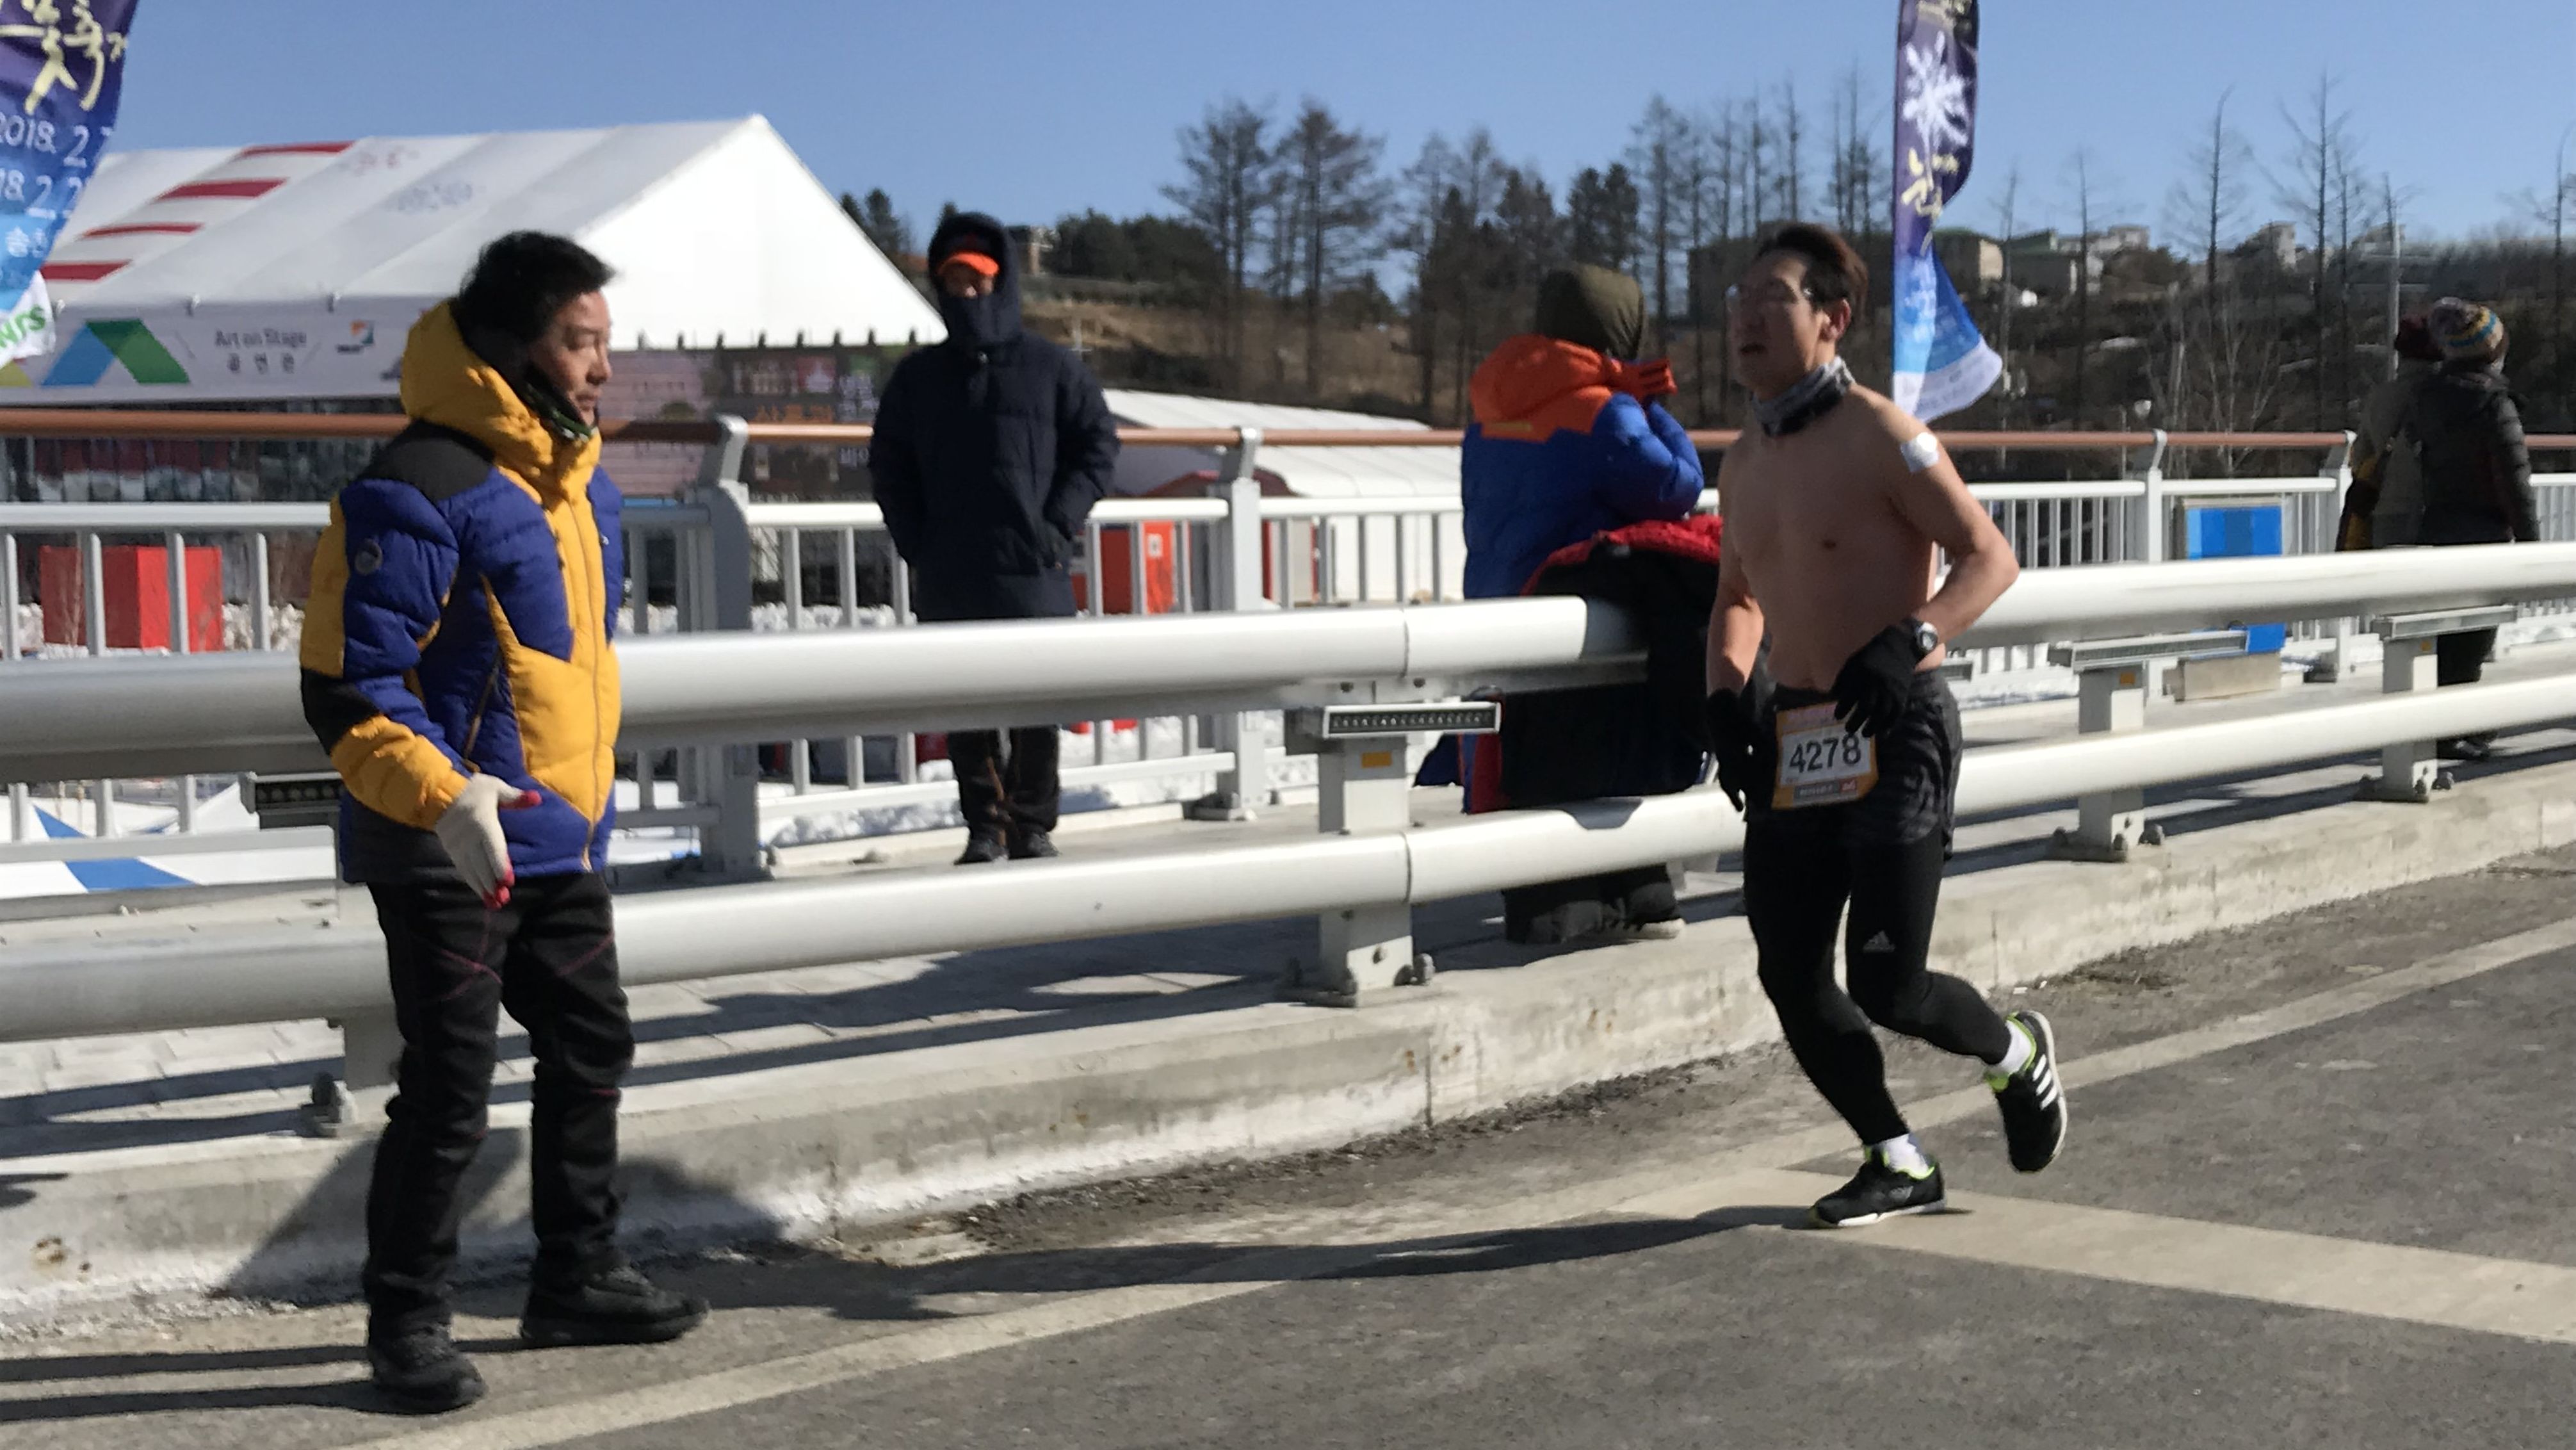 To qualify for a medal, runners have to run shirtless.